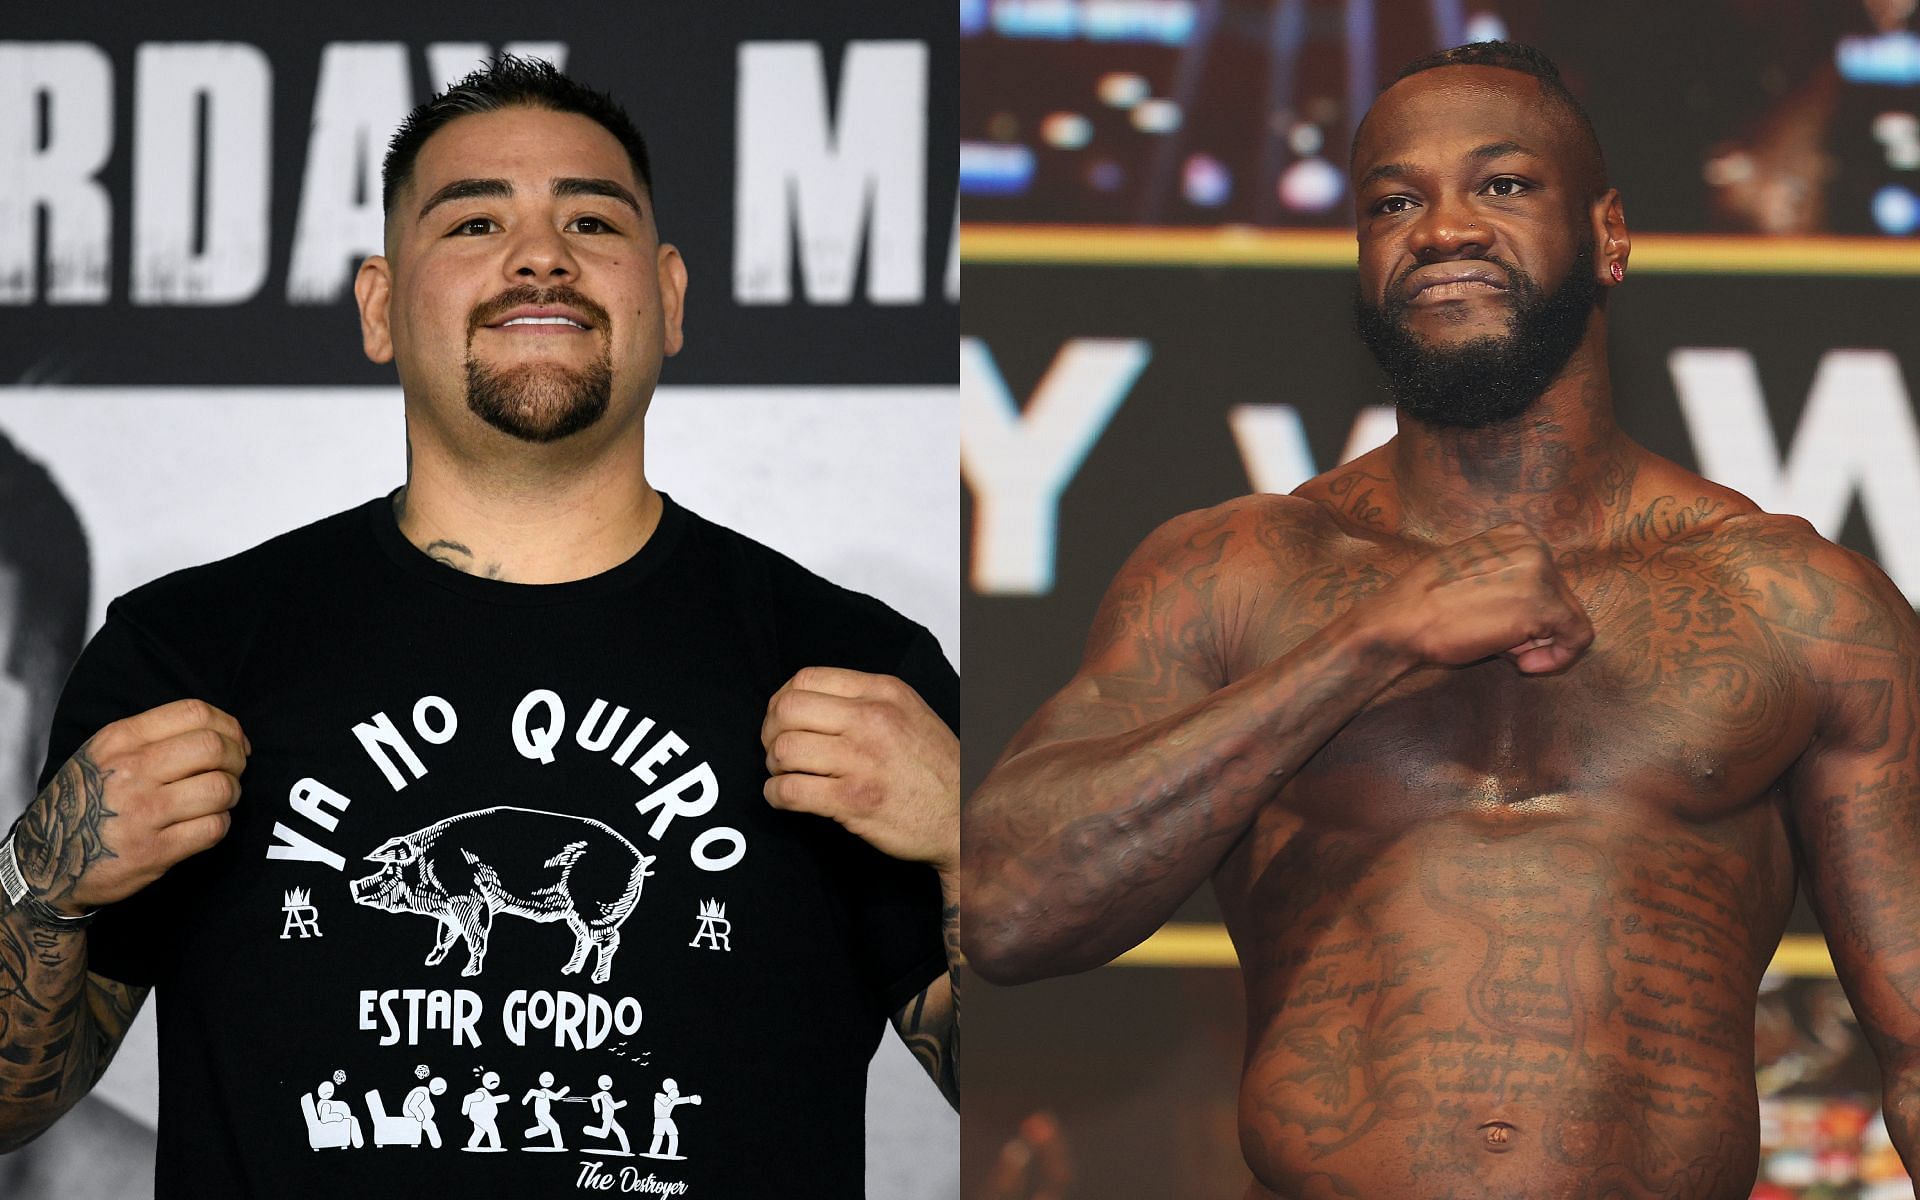 Andy Ruiz (left) and Deontay Wilder (right) [Image credits: Getty Images] 